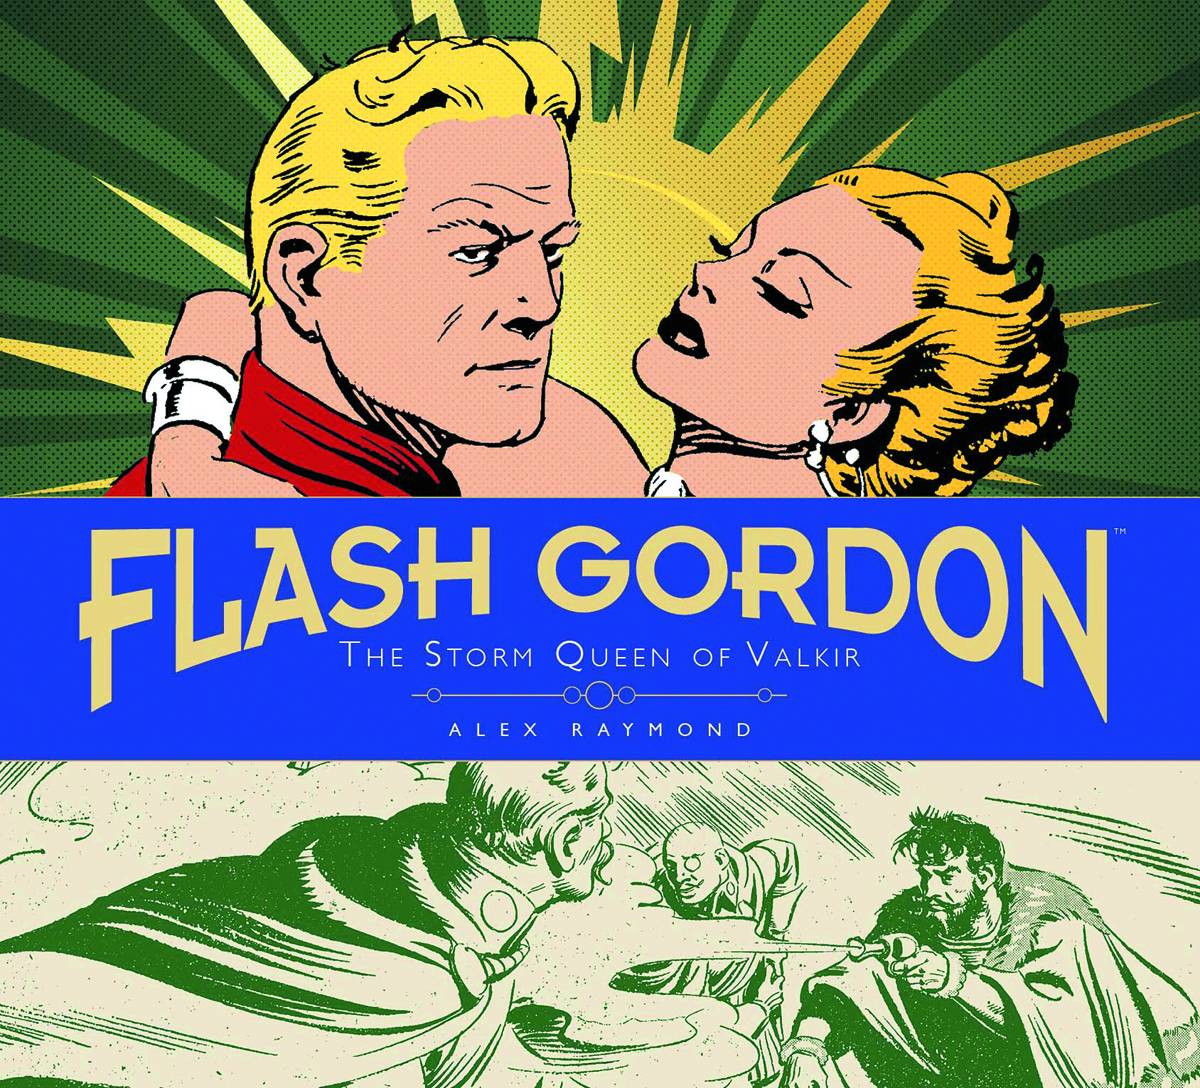 Complete Flash Gordon Library Hardcover Graphic Novel Volume 4 Storm Queen of Valkir